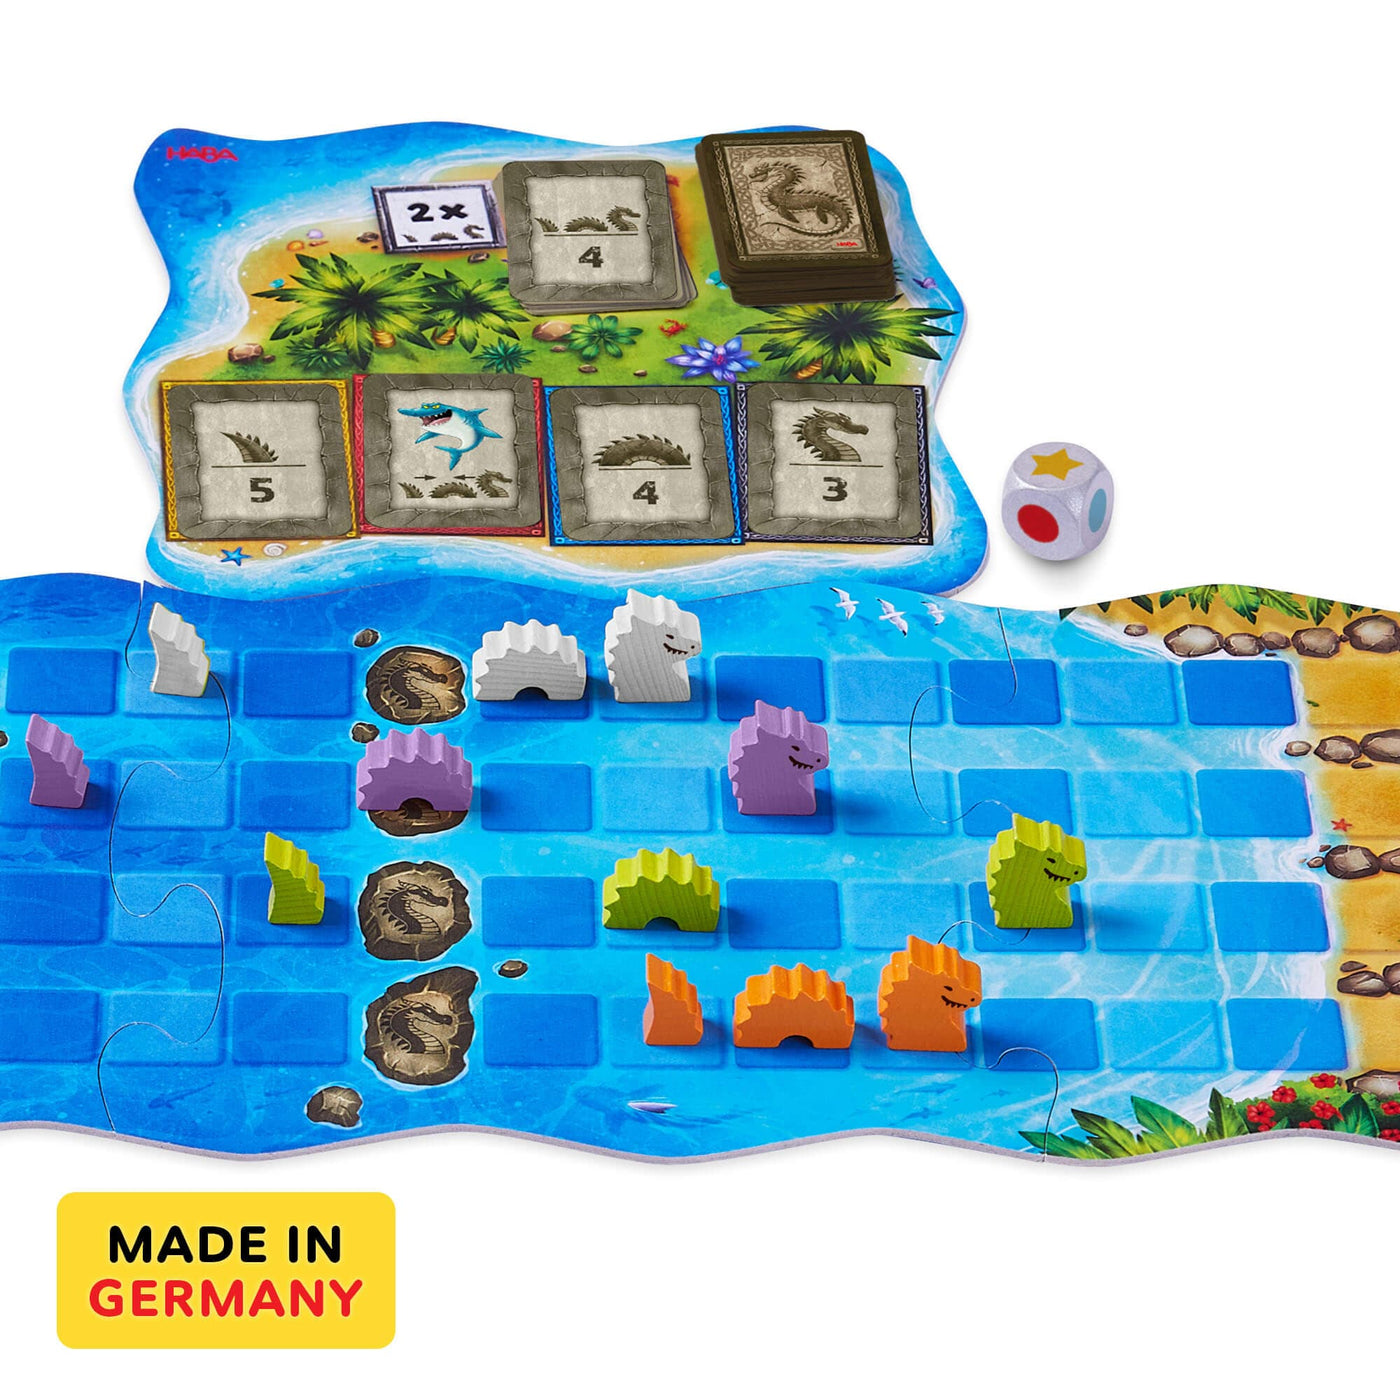 Water Dragons game board with gray, purple, green, and orange wooden pieces, cardboard game board, wooden die, and cards on a white backgrounc